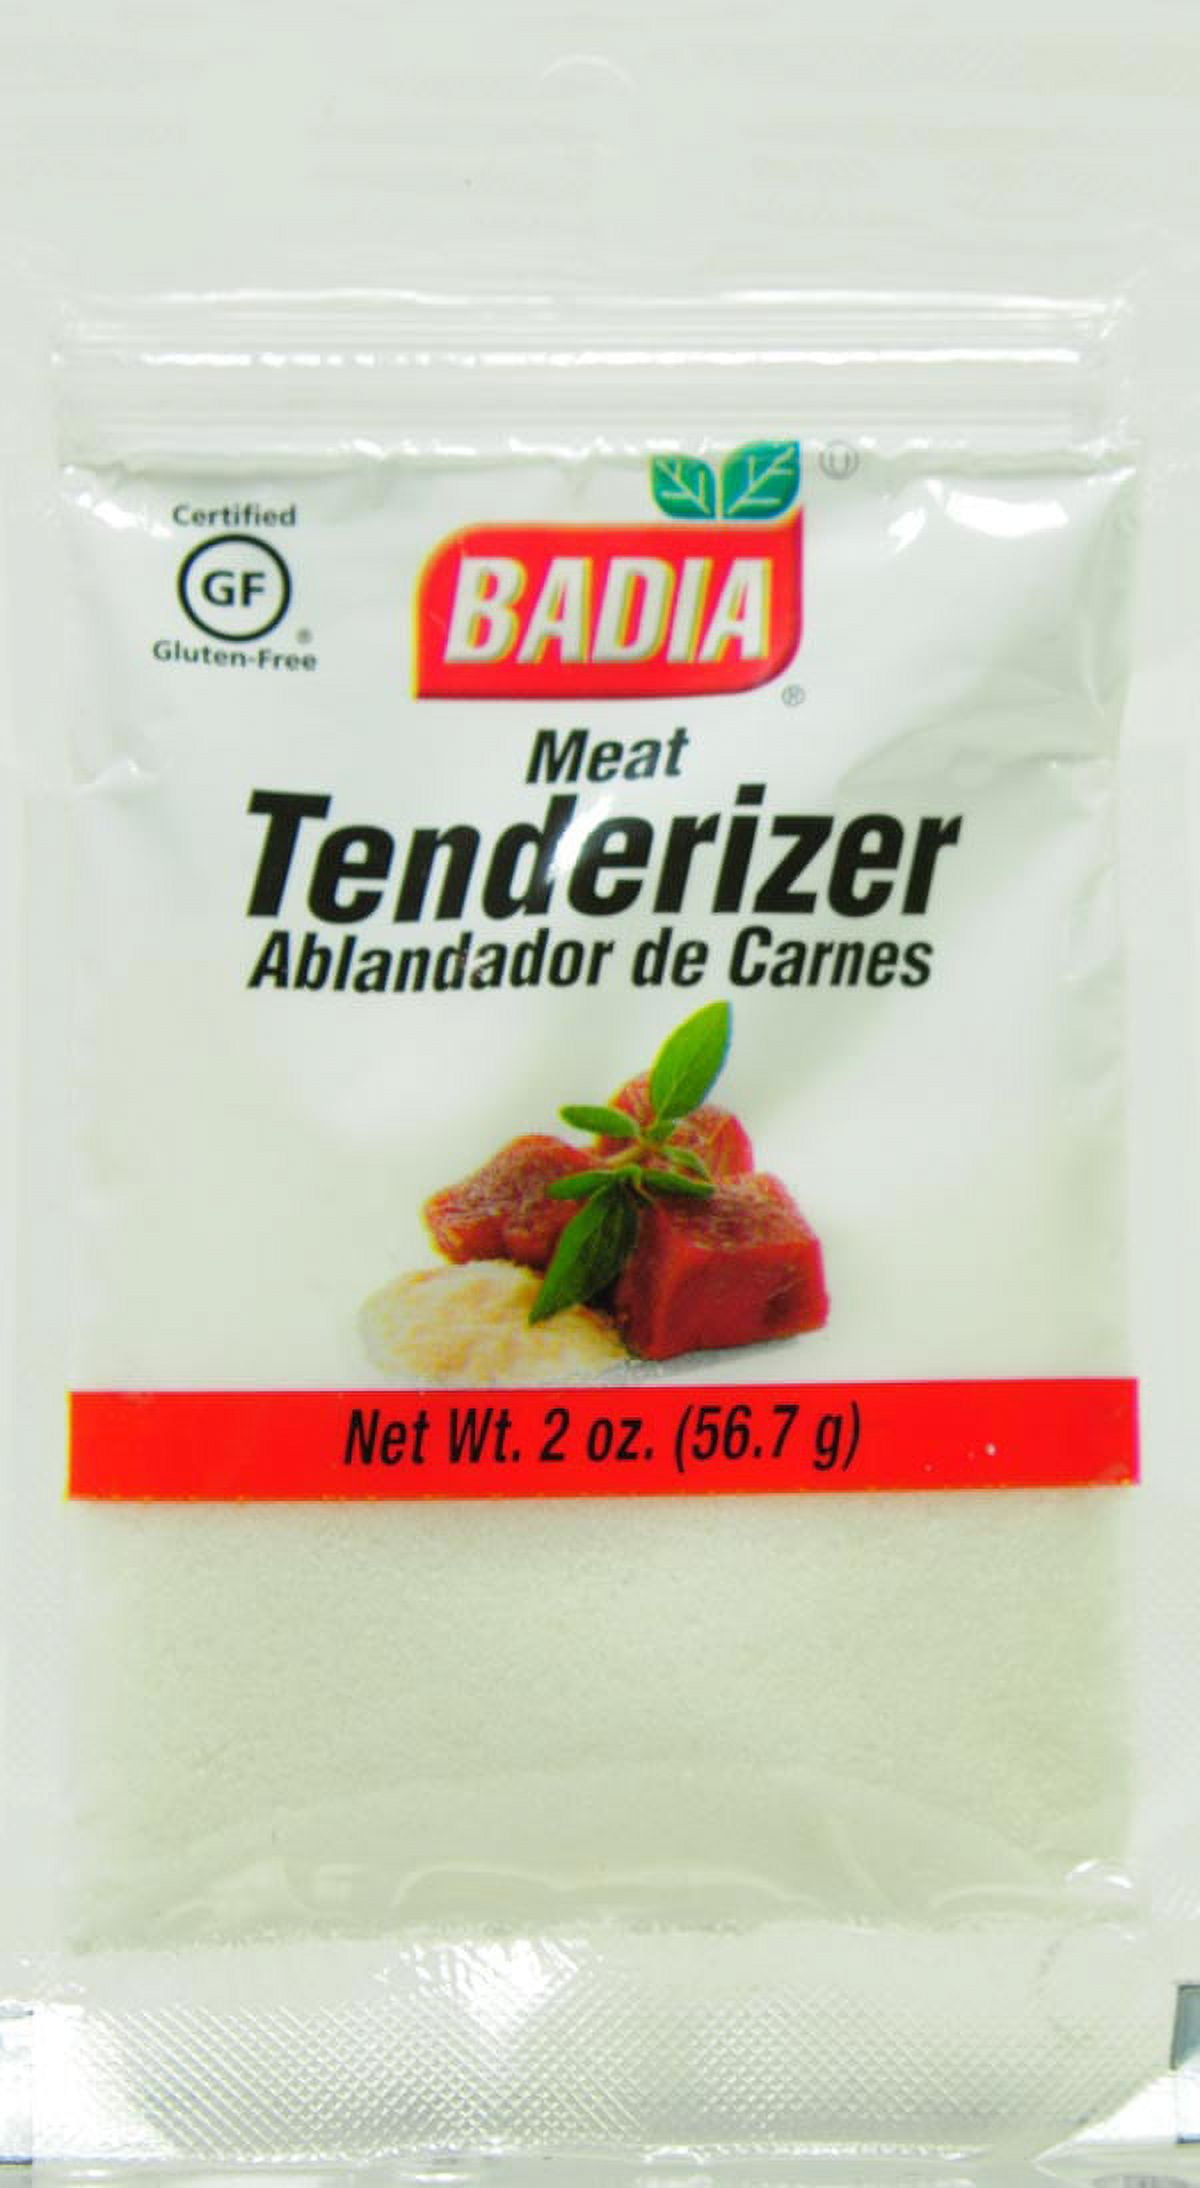 Badia Spices Meat Tenderizer - Case Of 8/4.5 Oz : Target